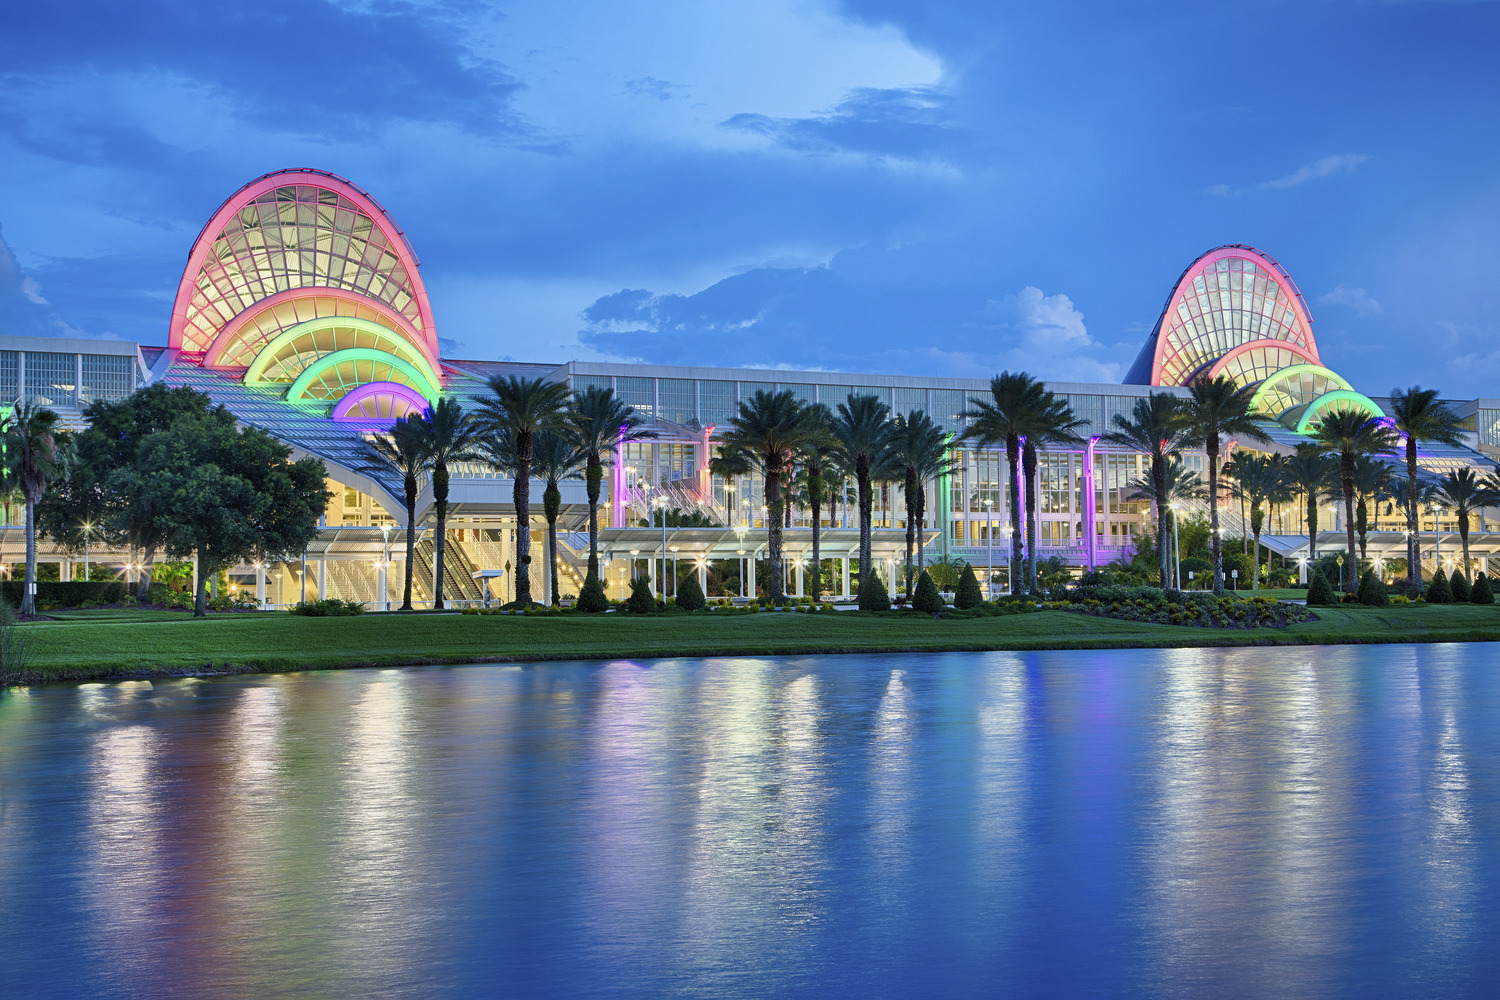 The orlando convention center is lit up at night.